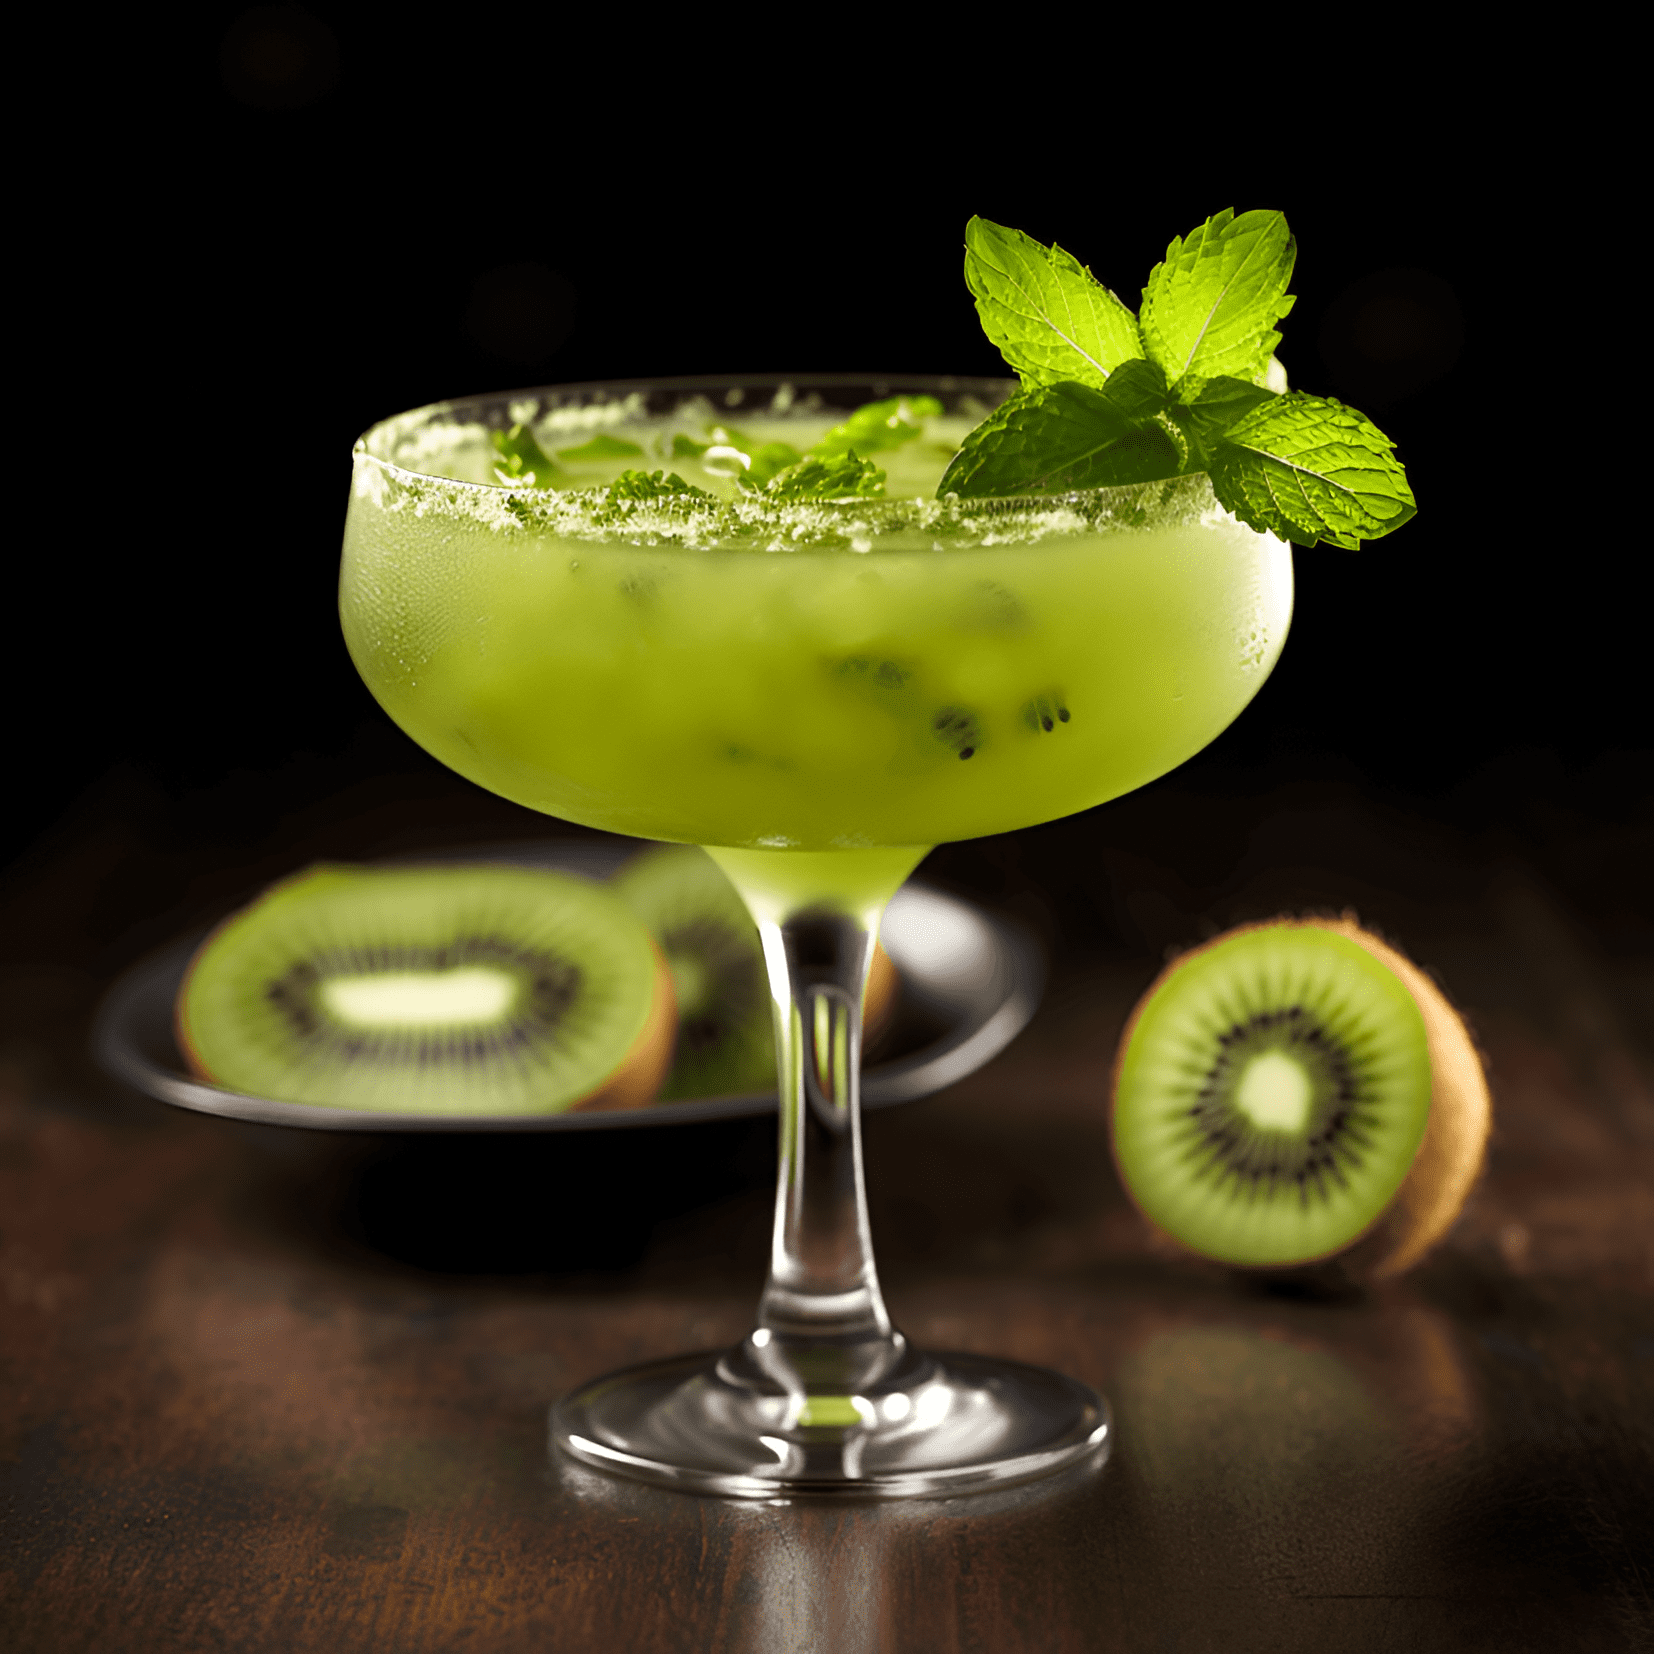 The Kiwi Cocktail offers a delightful balance of sweet and sour flavors, with a hint of tanginess from the kiwi fruit. It is light and refreshing, with a fruity aroma and a smooth finish.